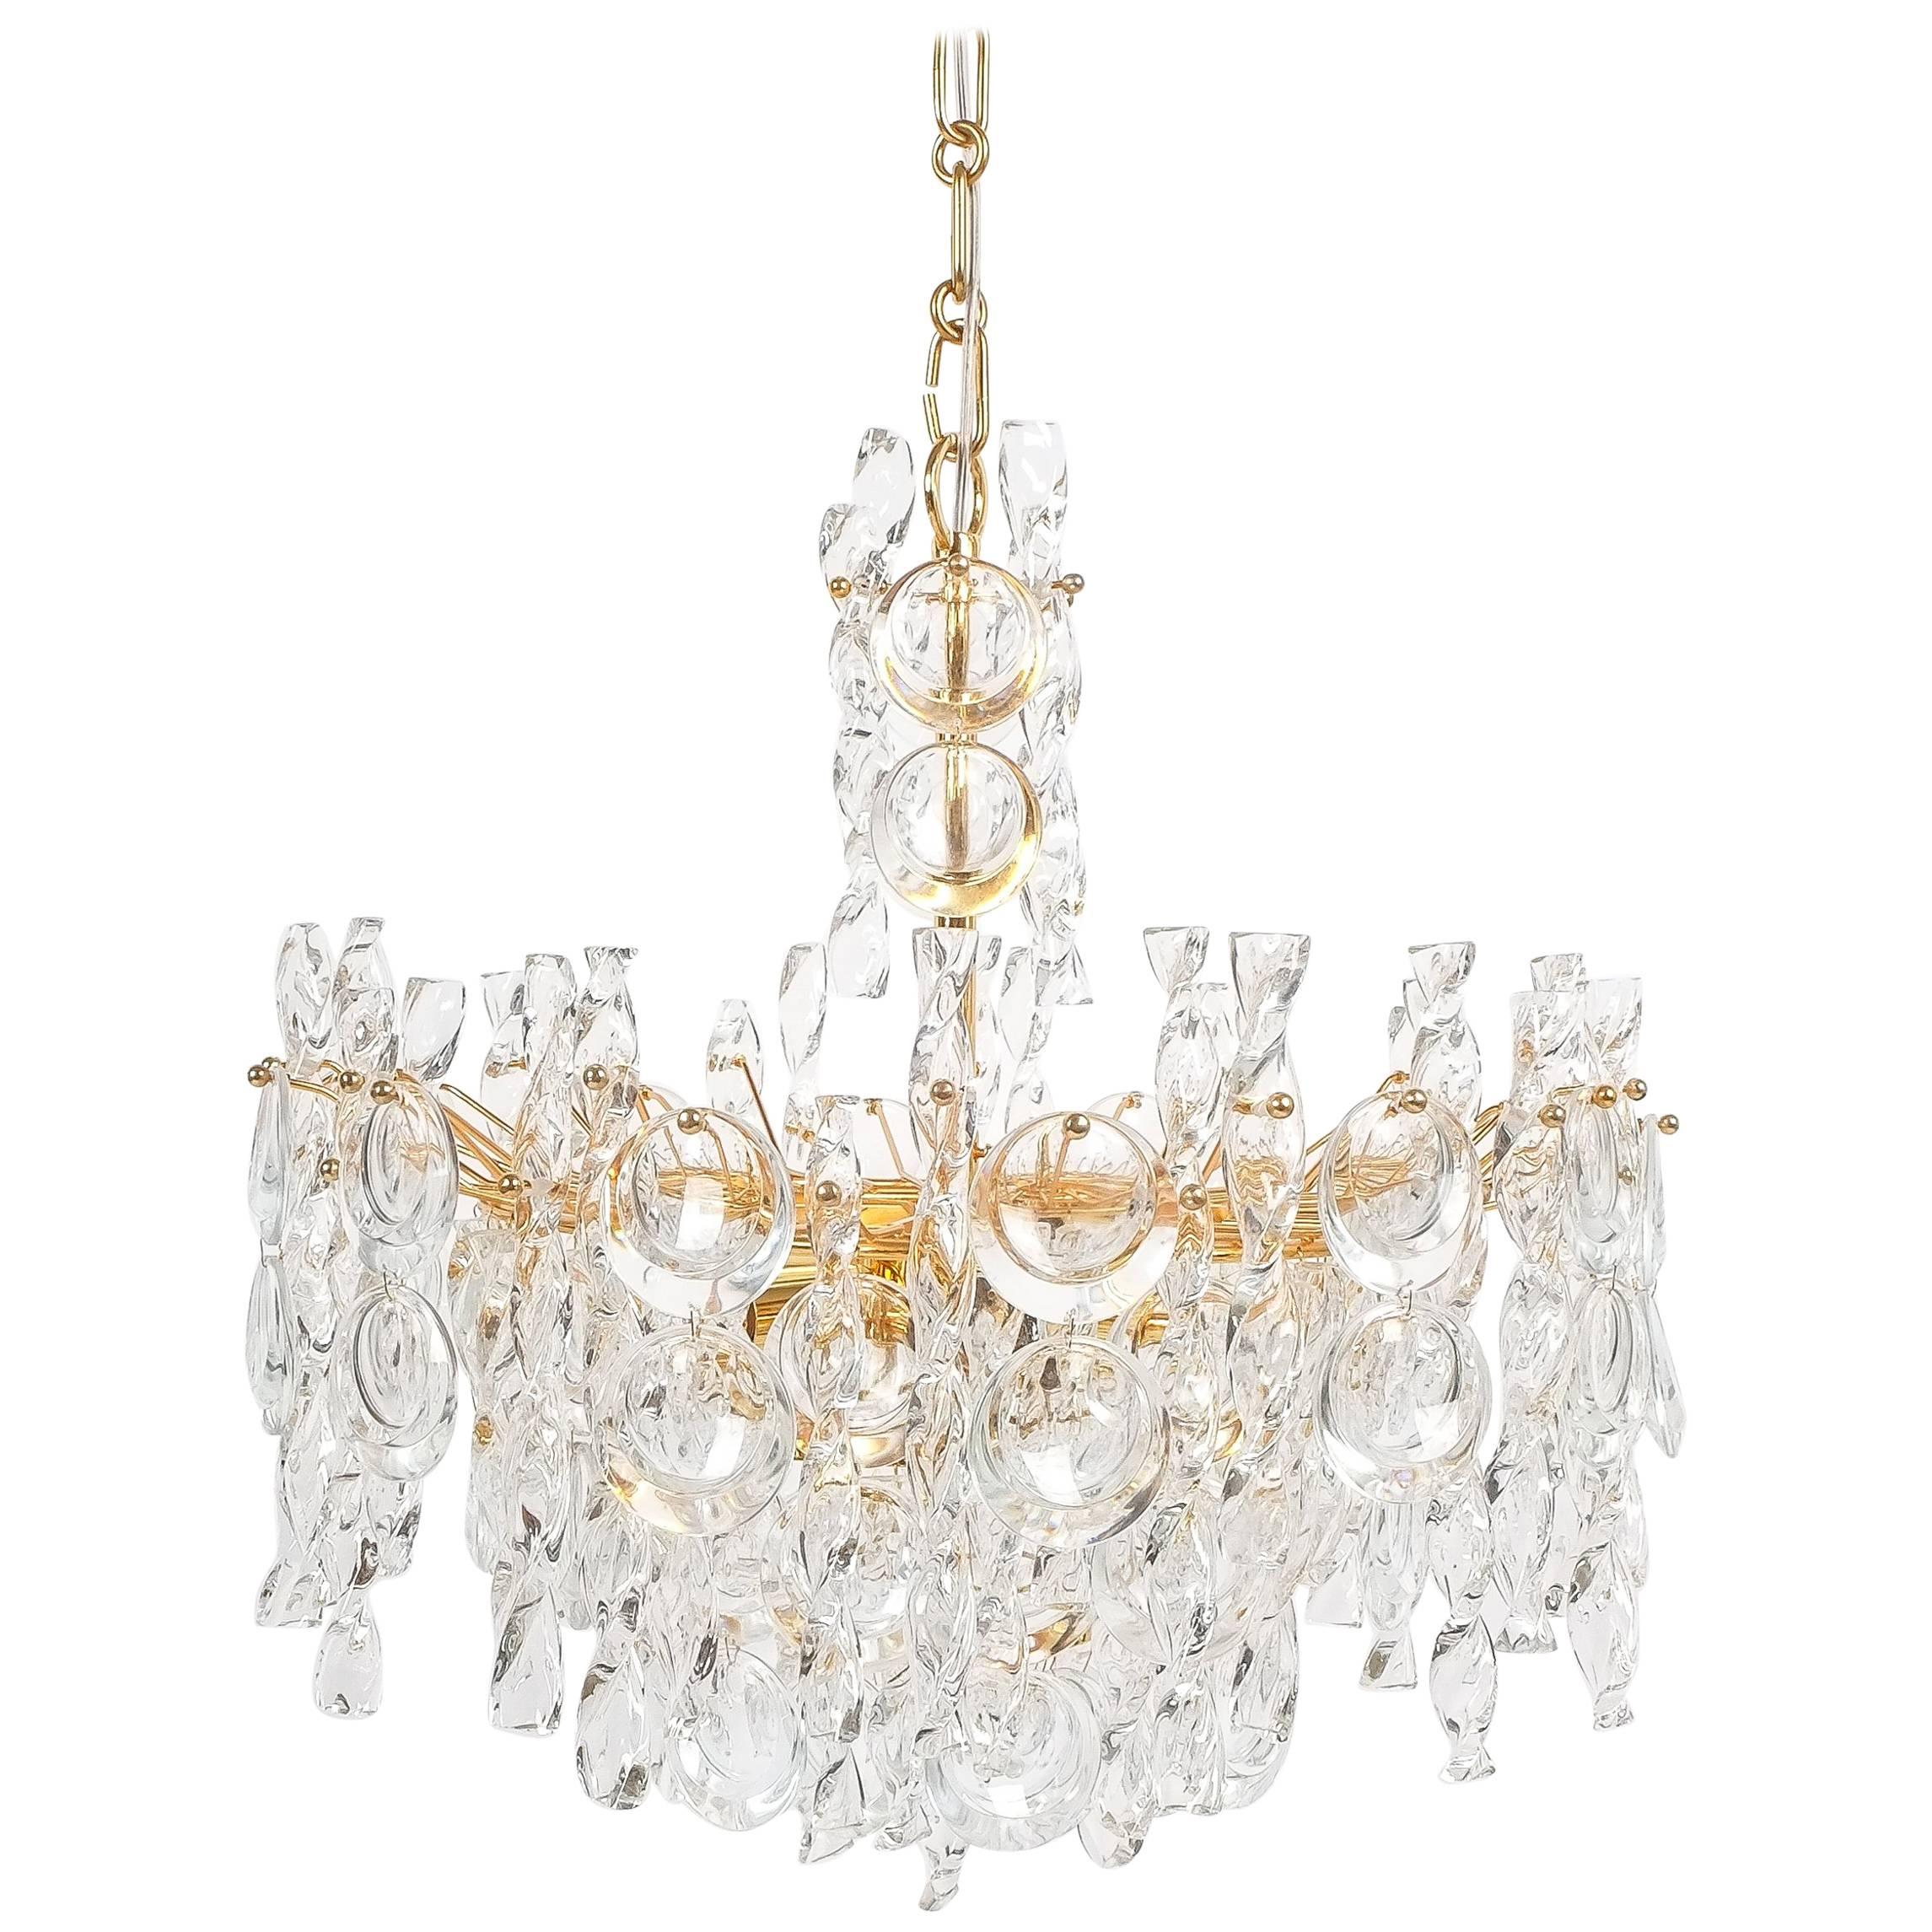 Palwa Tendril Ribbon Glass and Gold Chandelier Lamp Refurbished, 1960 For Sale